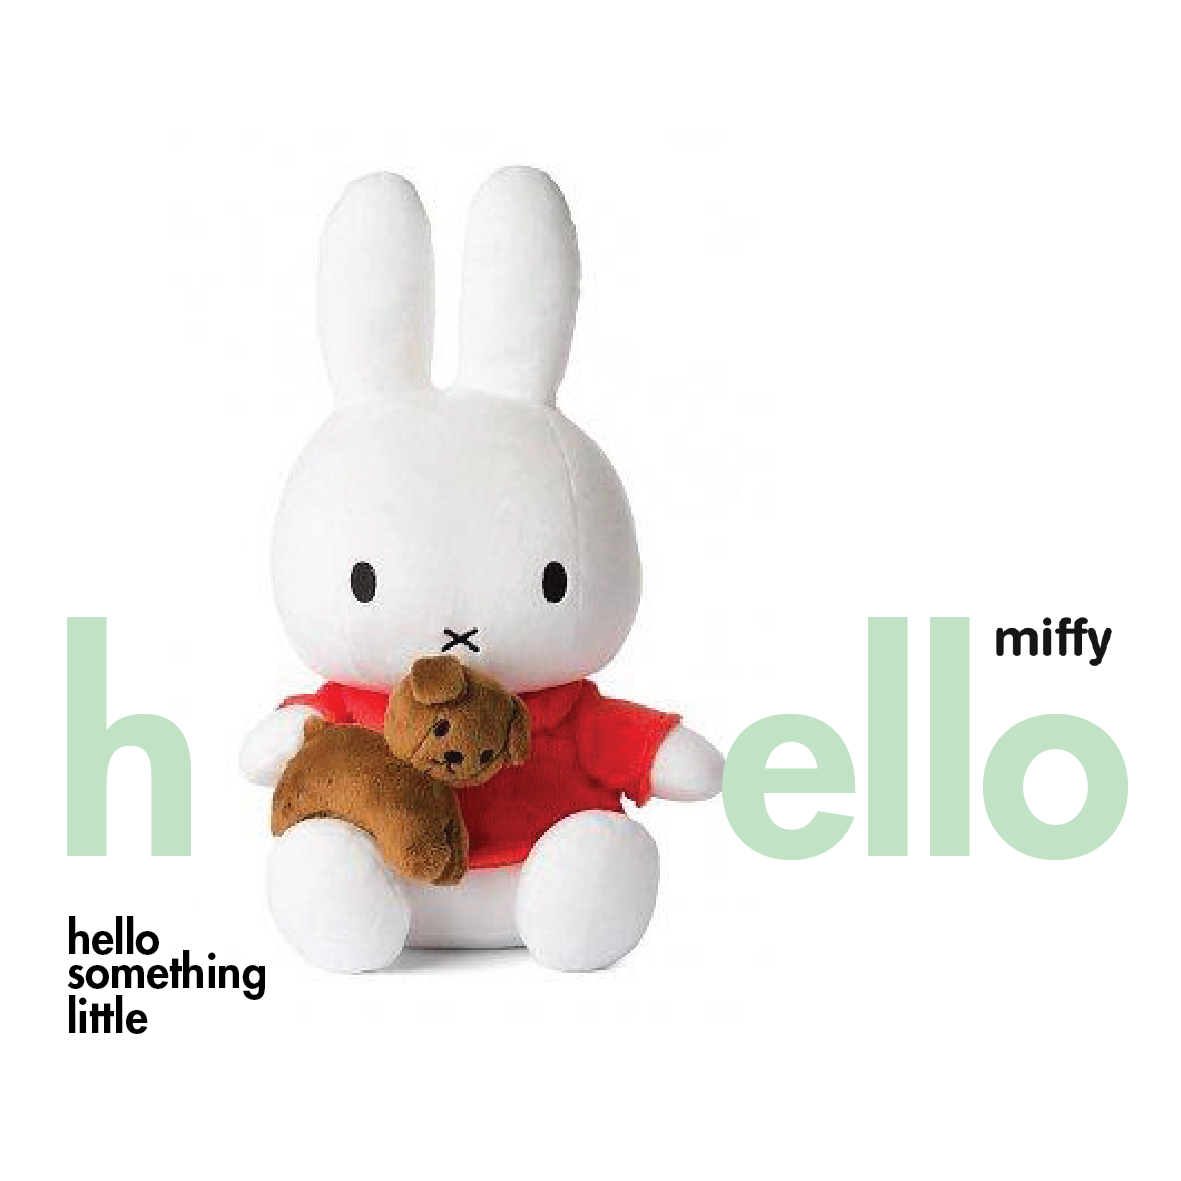 Miffy with snuffie the dog - Great